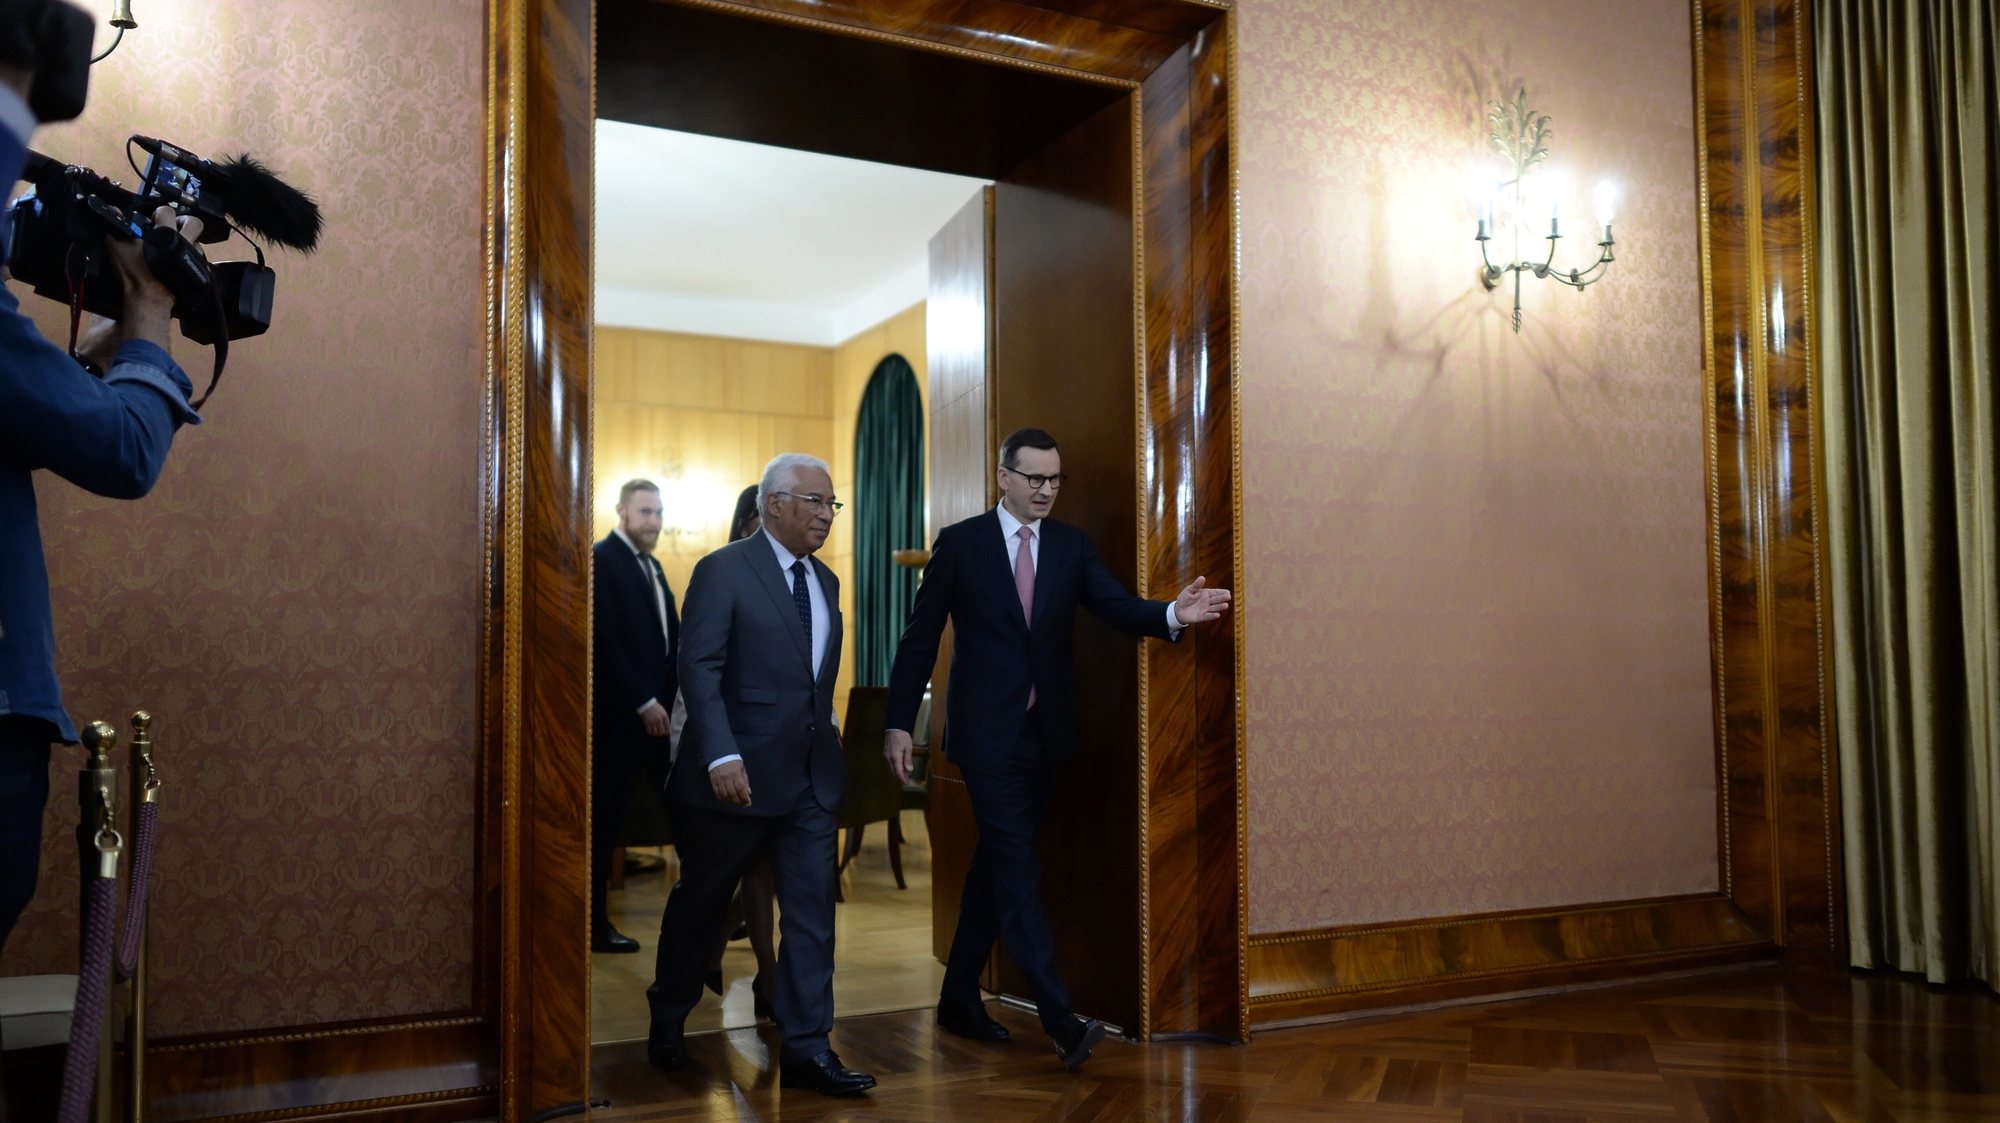 epa09959640 Polish Prime Minister Mateusz Morawiecki (C-R) welcomes Portuguese Prime Minister Antonio Costa (C-L) prior to their meeting at the Chancellery of the Prime Minister in Warsaw, Poland, 20 May 2022.  EPA/Marcin Obara POLAND OUT